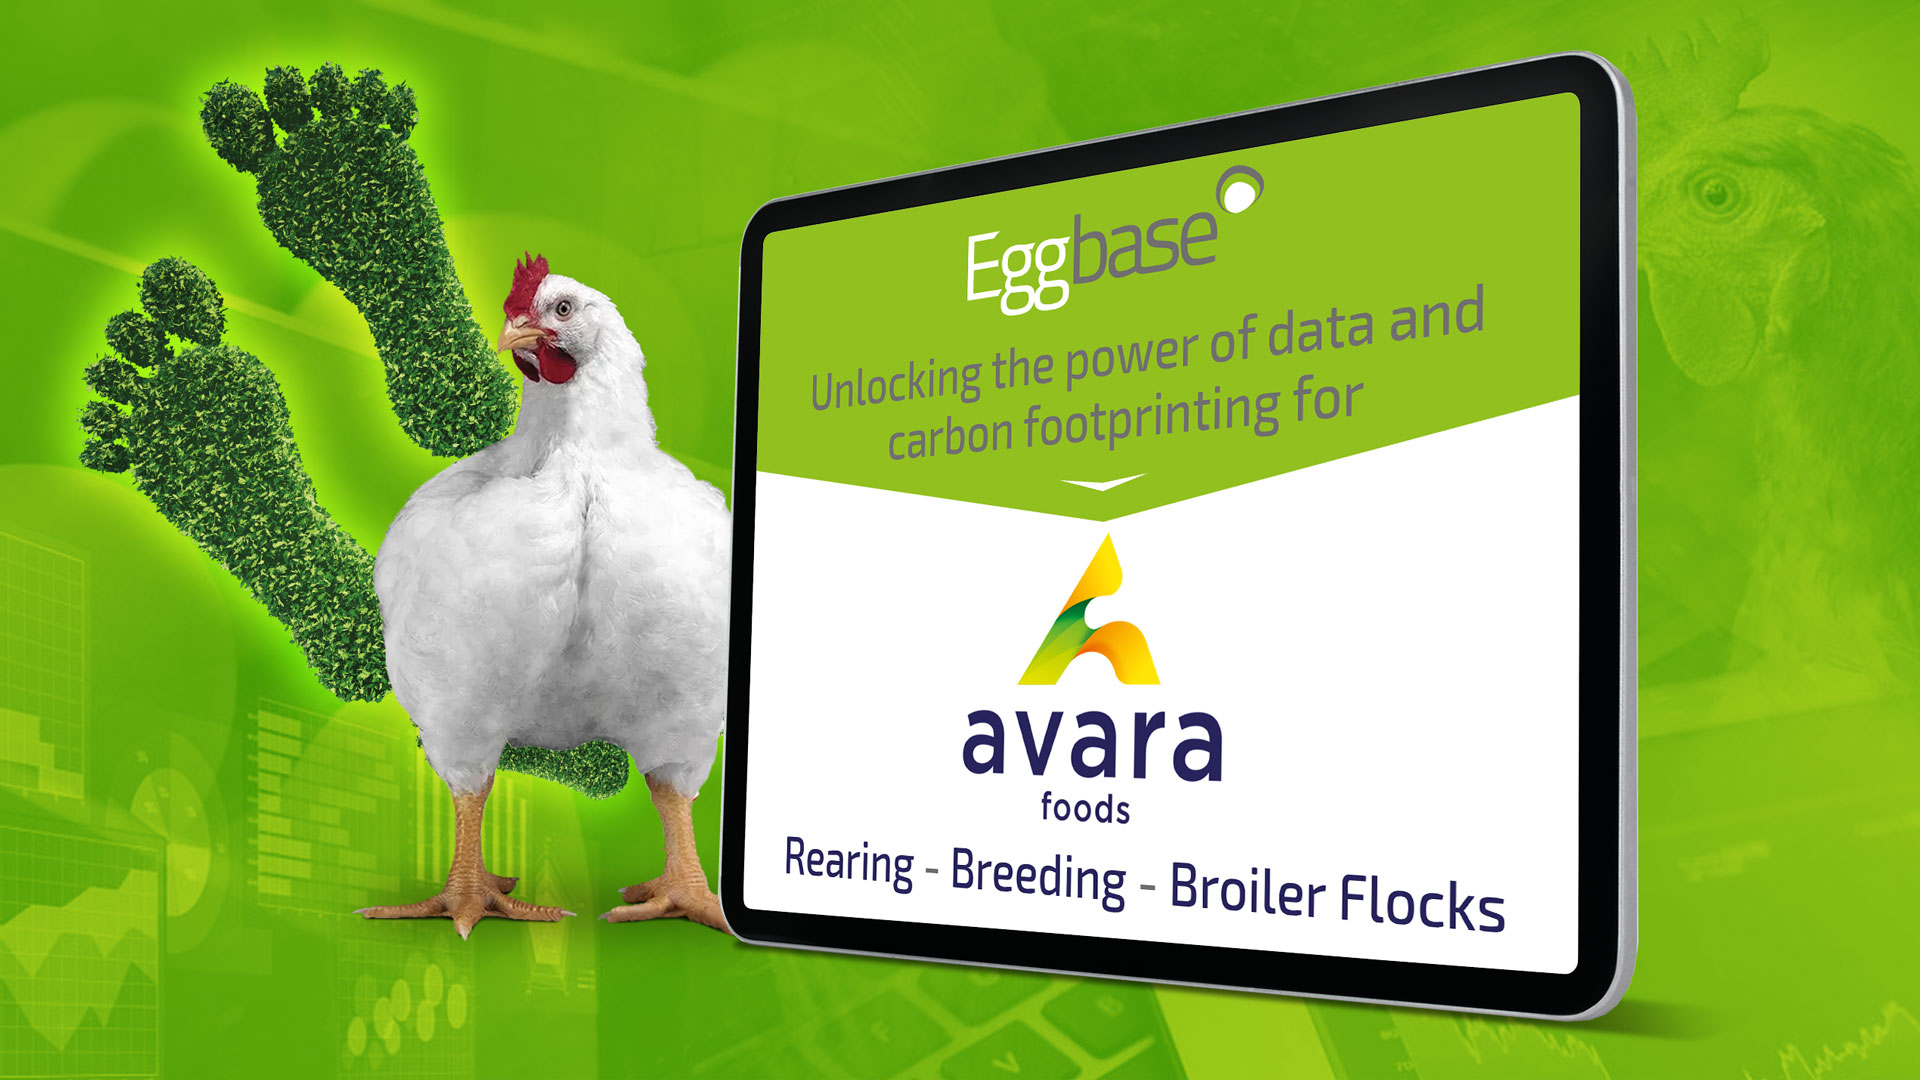 Unlocking the power of data and carbon footprinting for Avara Foods